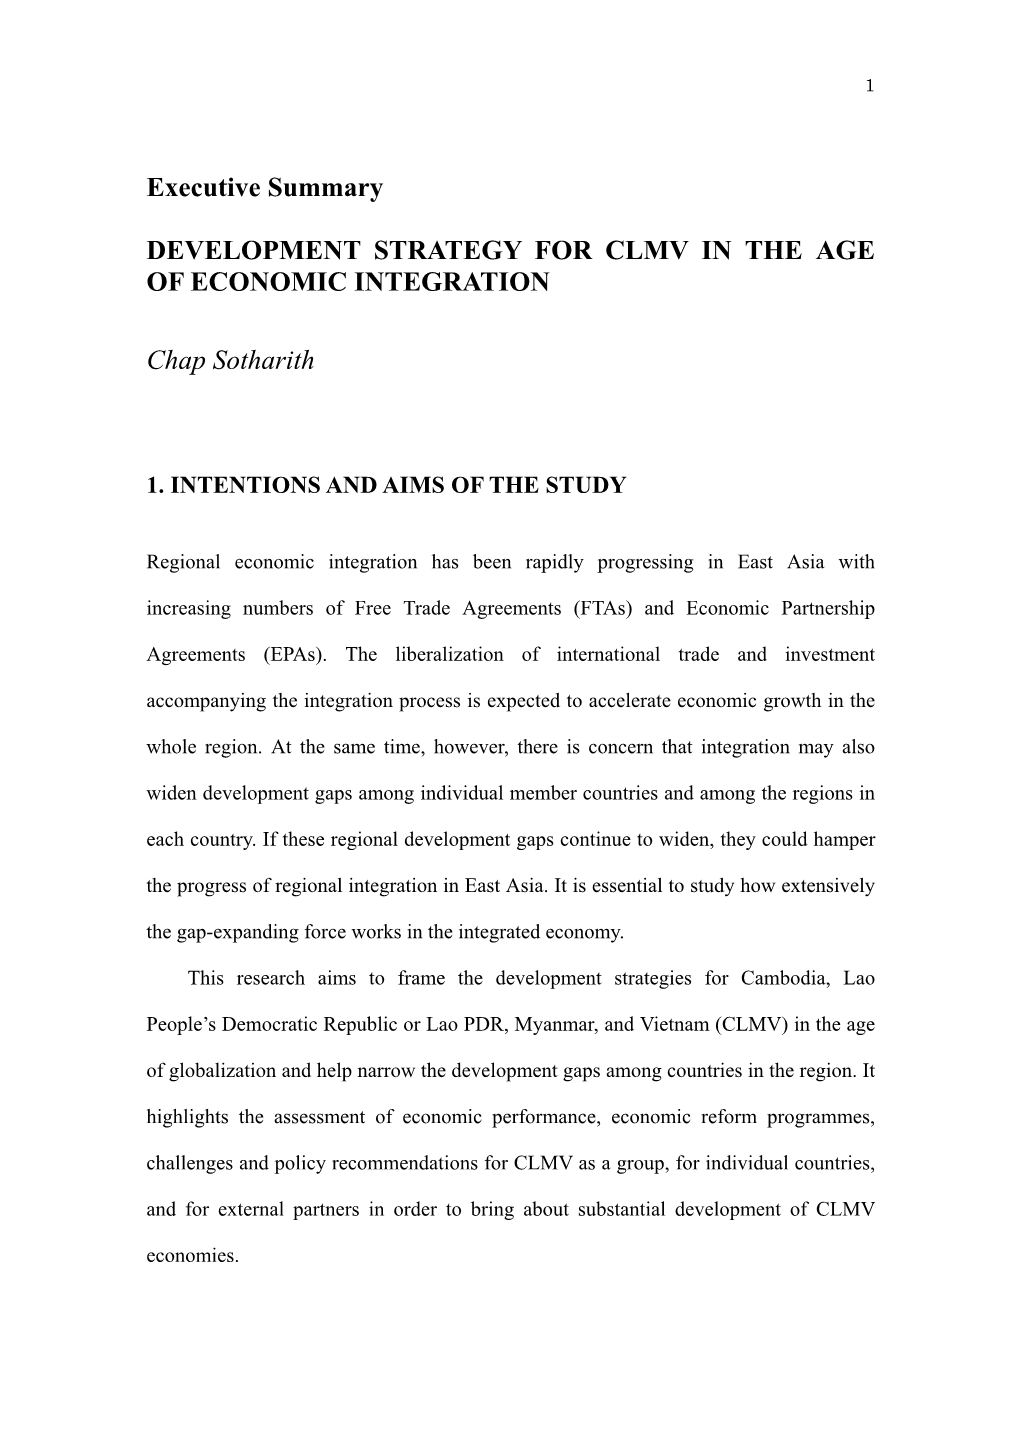 Executive Summary DEVELOPMENT STRATEGY for CLMV in THE